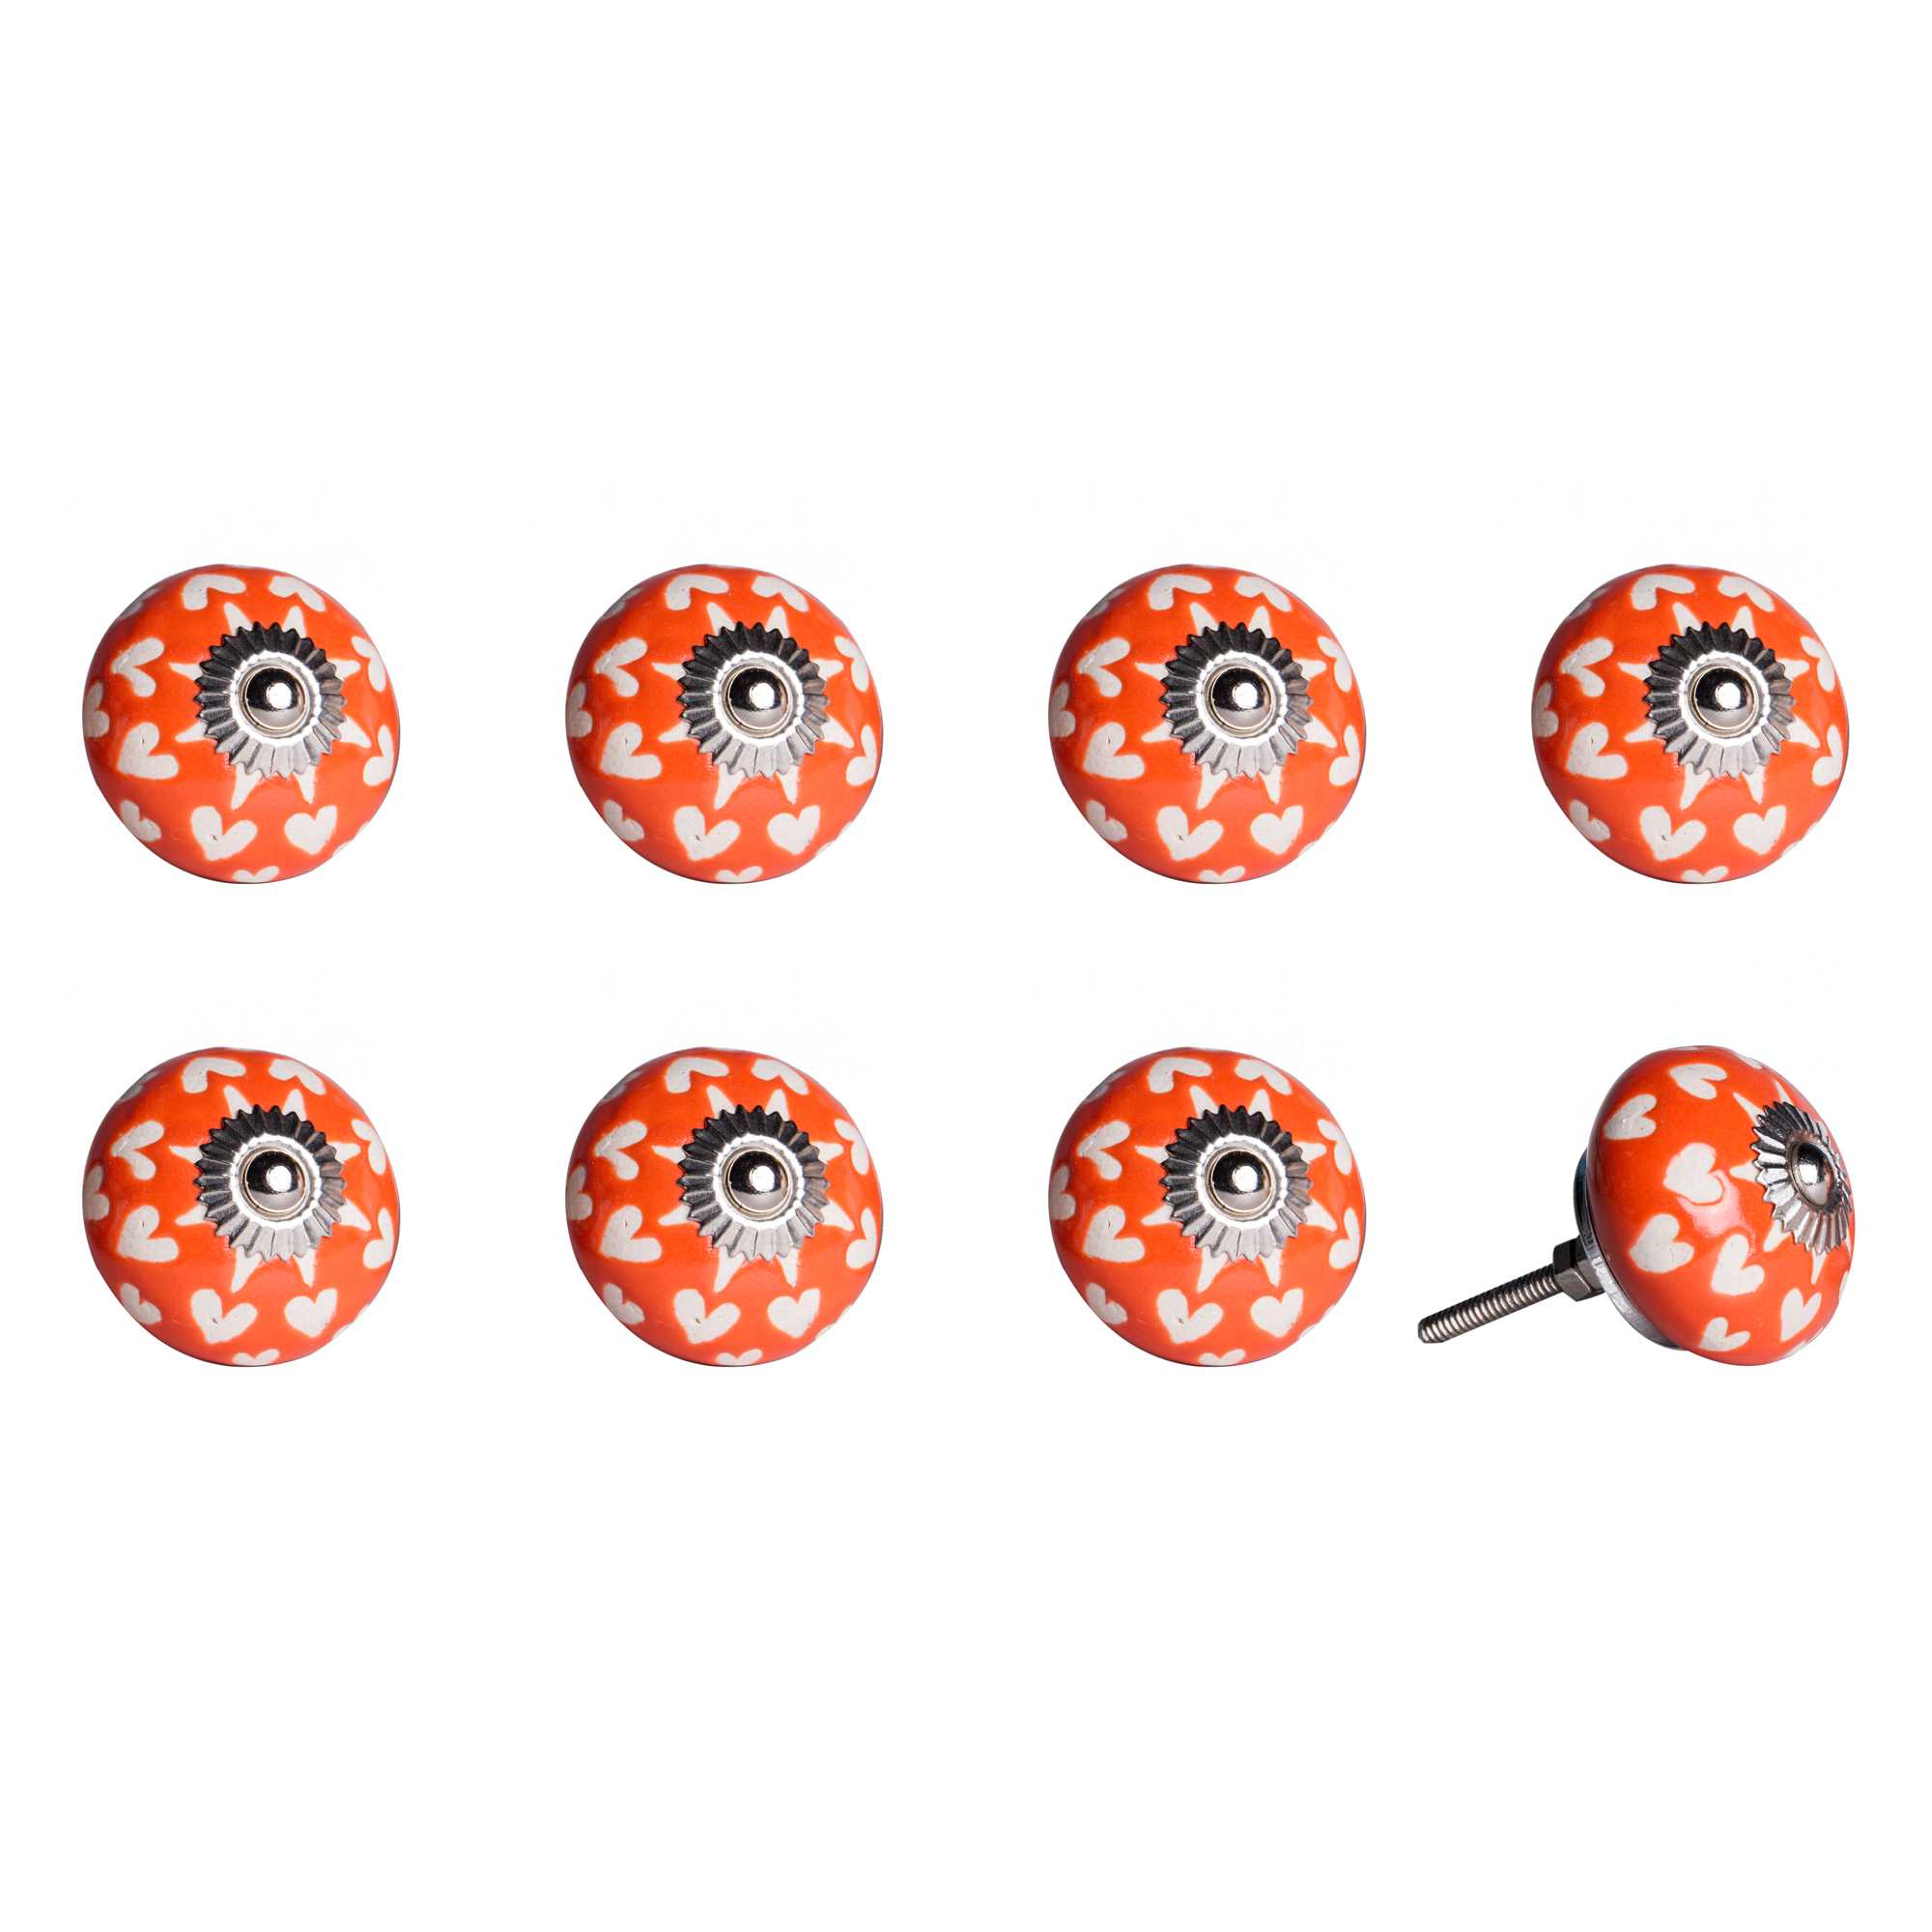 1.5" x 1.5" x 1.5" Hues Of Orange, White And Silver - Knobs 8-Pack